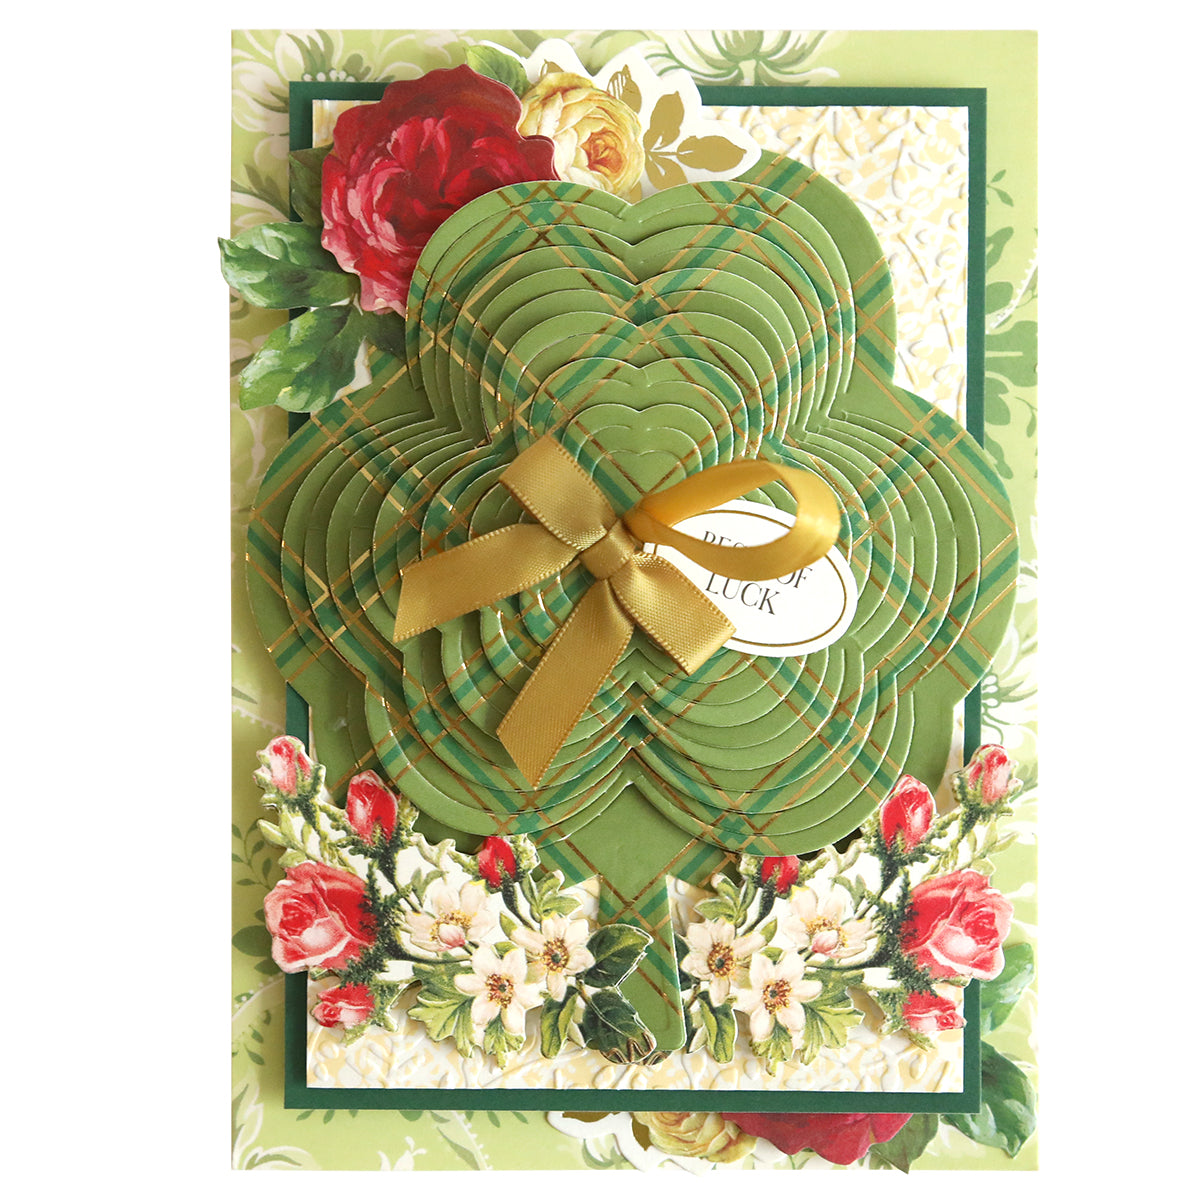 A Shamrock Kirigami Dies adorned with flowers and ribbons, perfect for St. Patrick's Day celebrations.